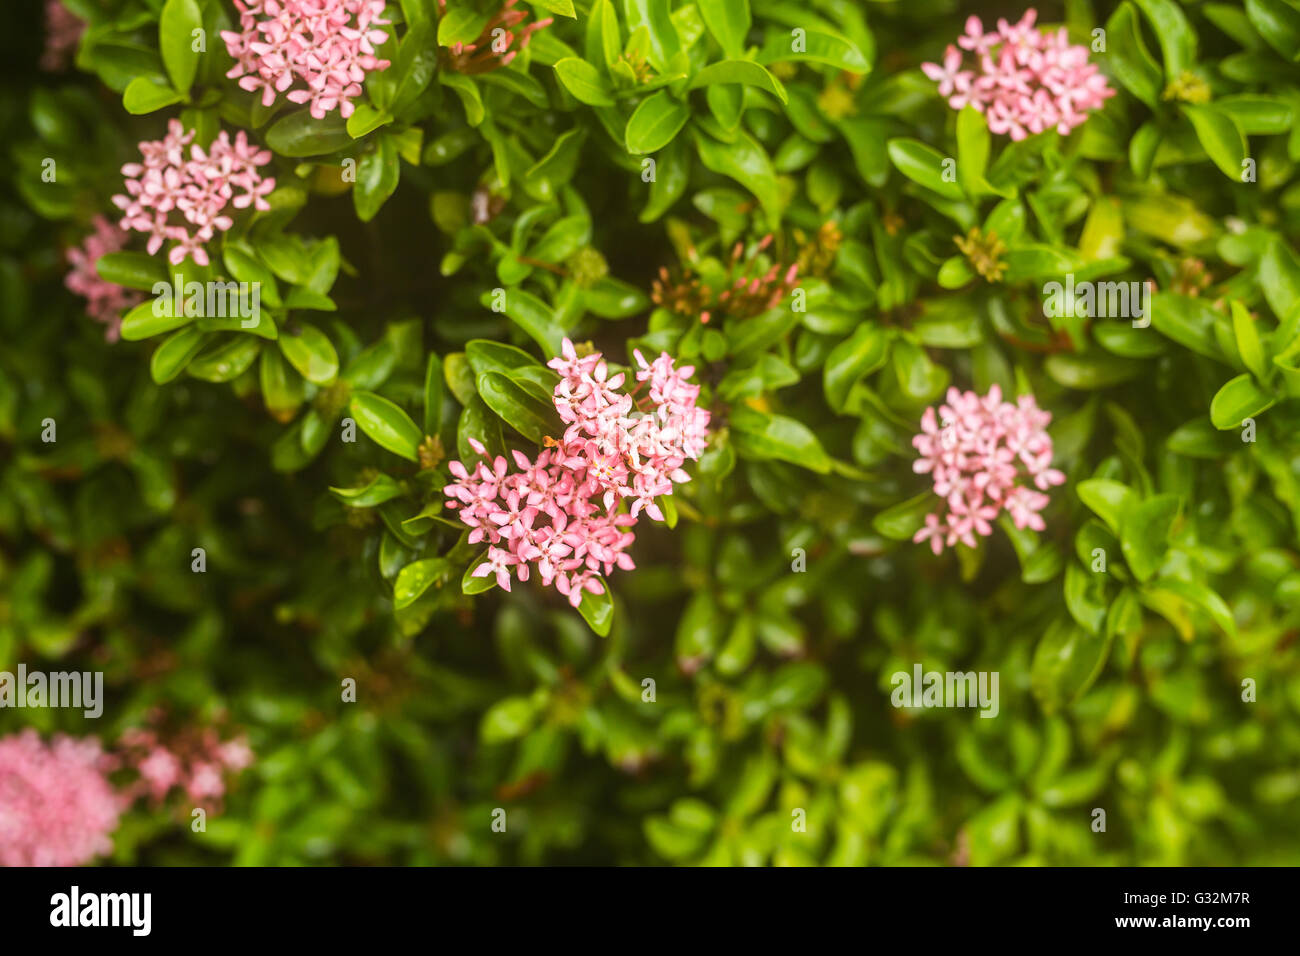 pink flowers in a garden Stock Photo